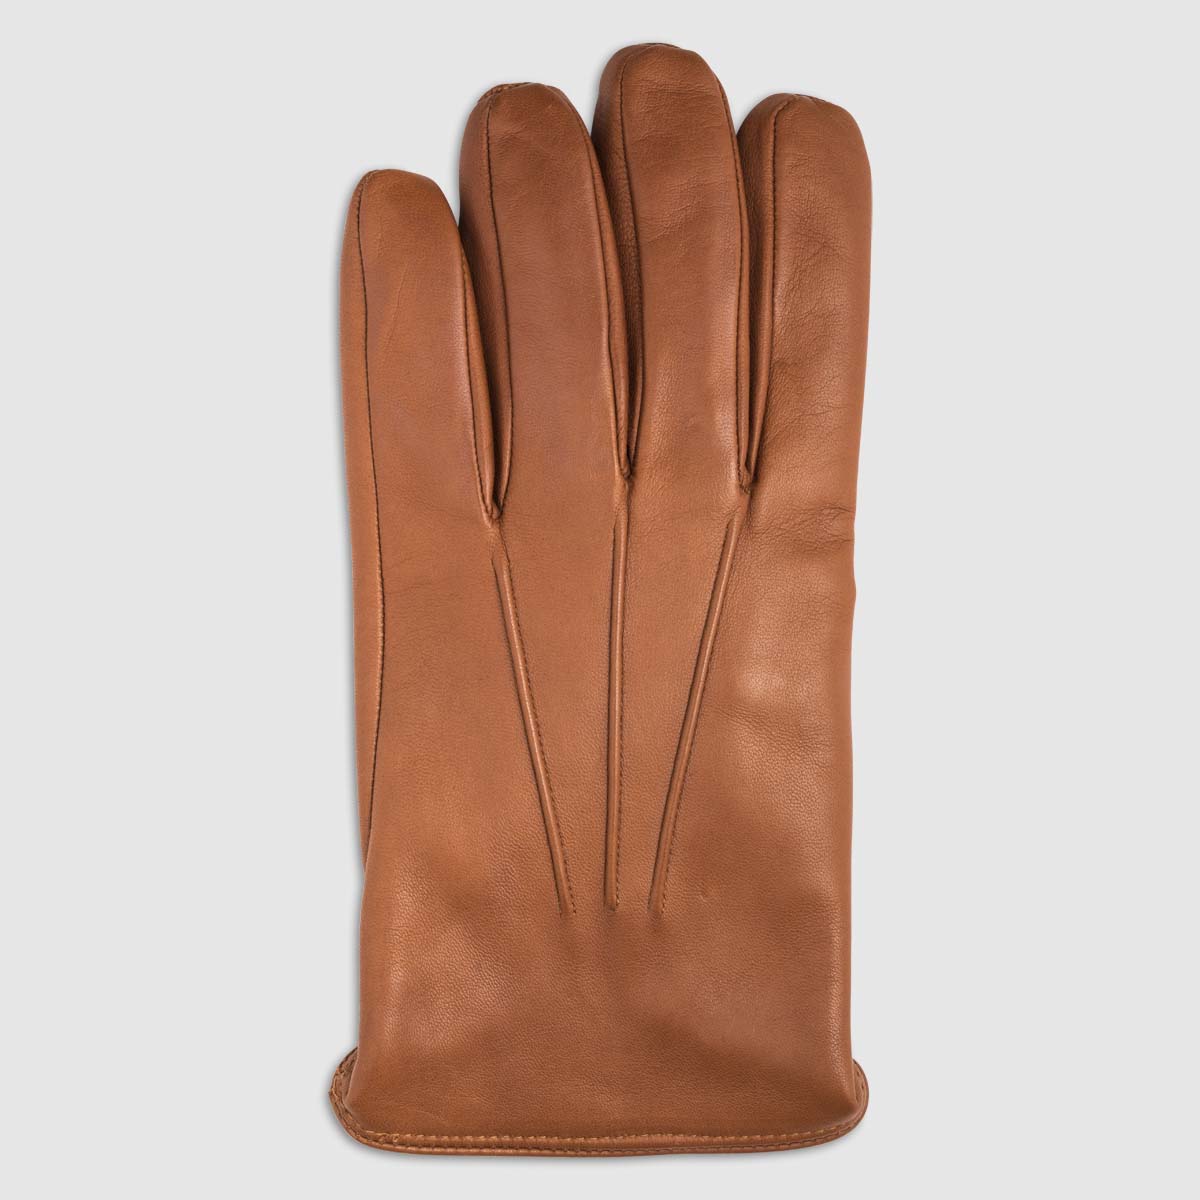 Nappa Leather Glove with Cashmere Lining in Cognac – 8